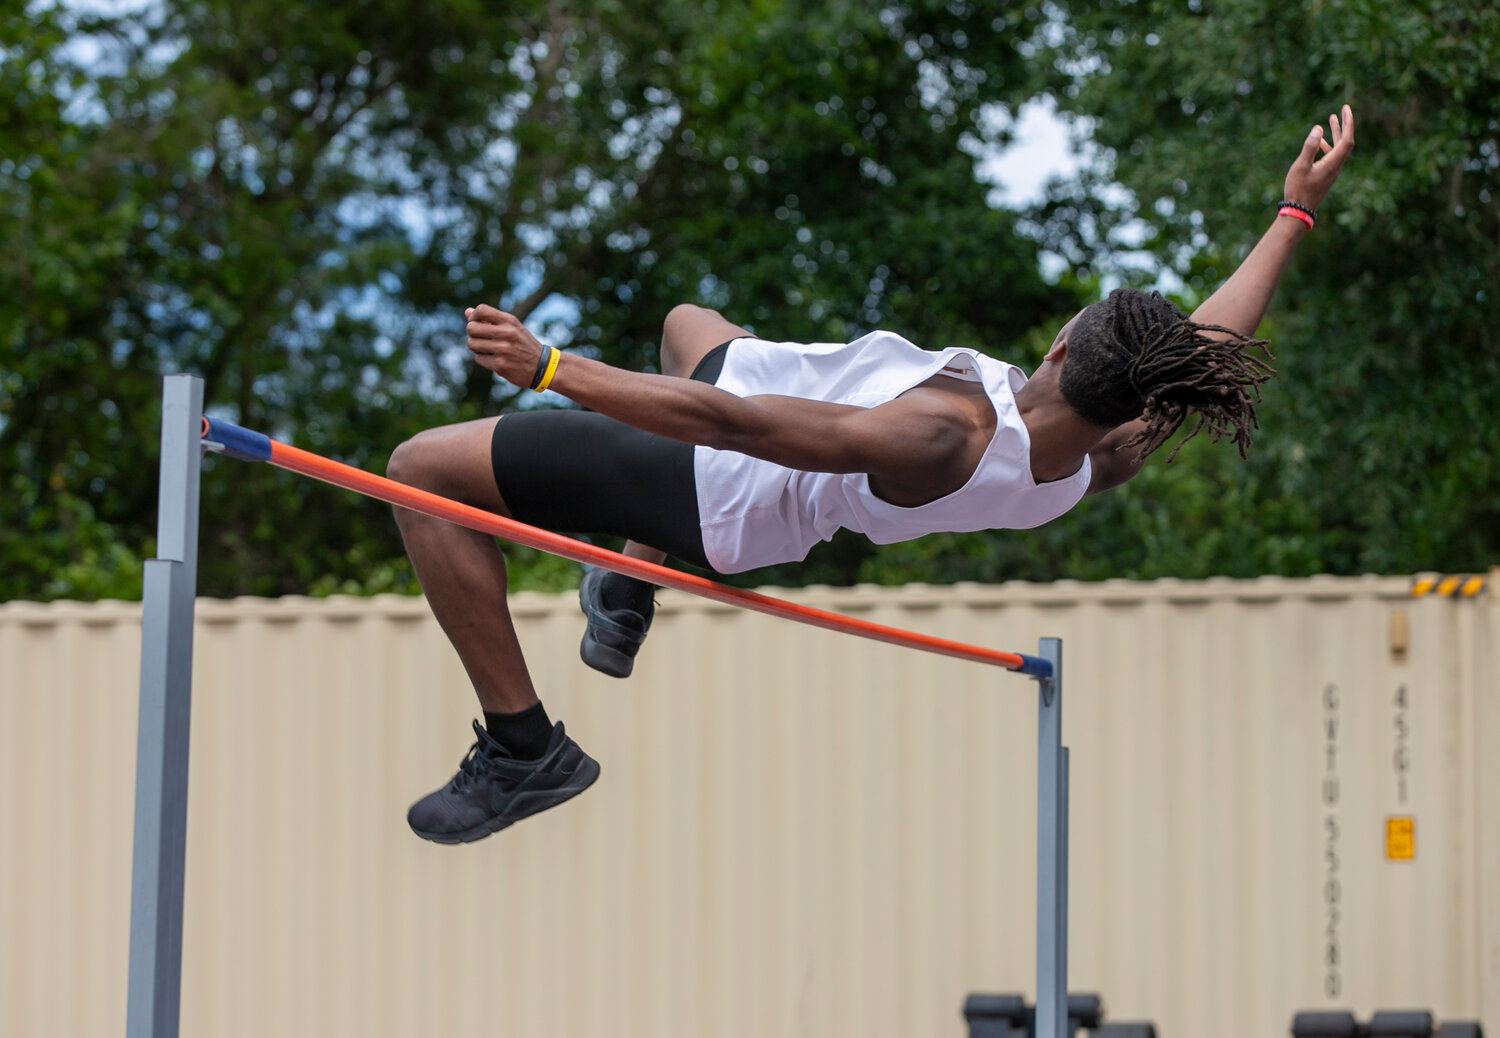 Daphne sophomore Cayden Williams clears 5’ 8” in the high jump competition Tuesday afternoon at Jubilee Stadium during the Baldwin County track and field championship meet. Williams went onto clear 6’ and win the event for the host Trojans.